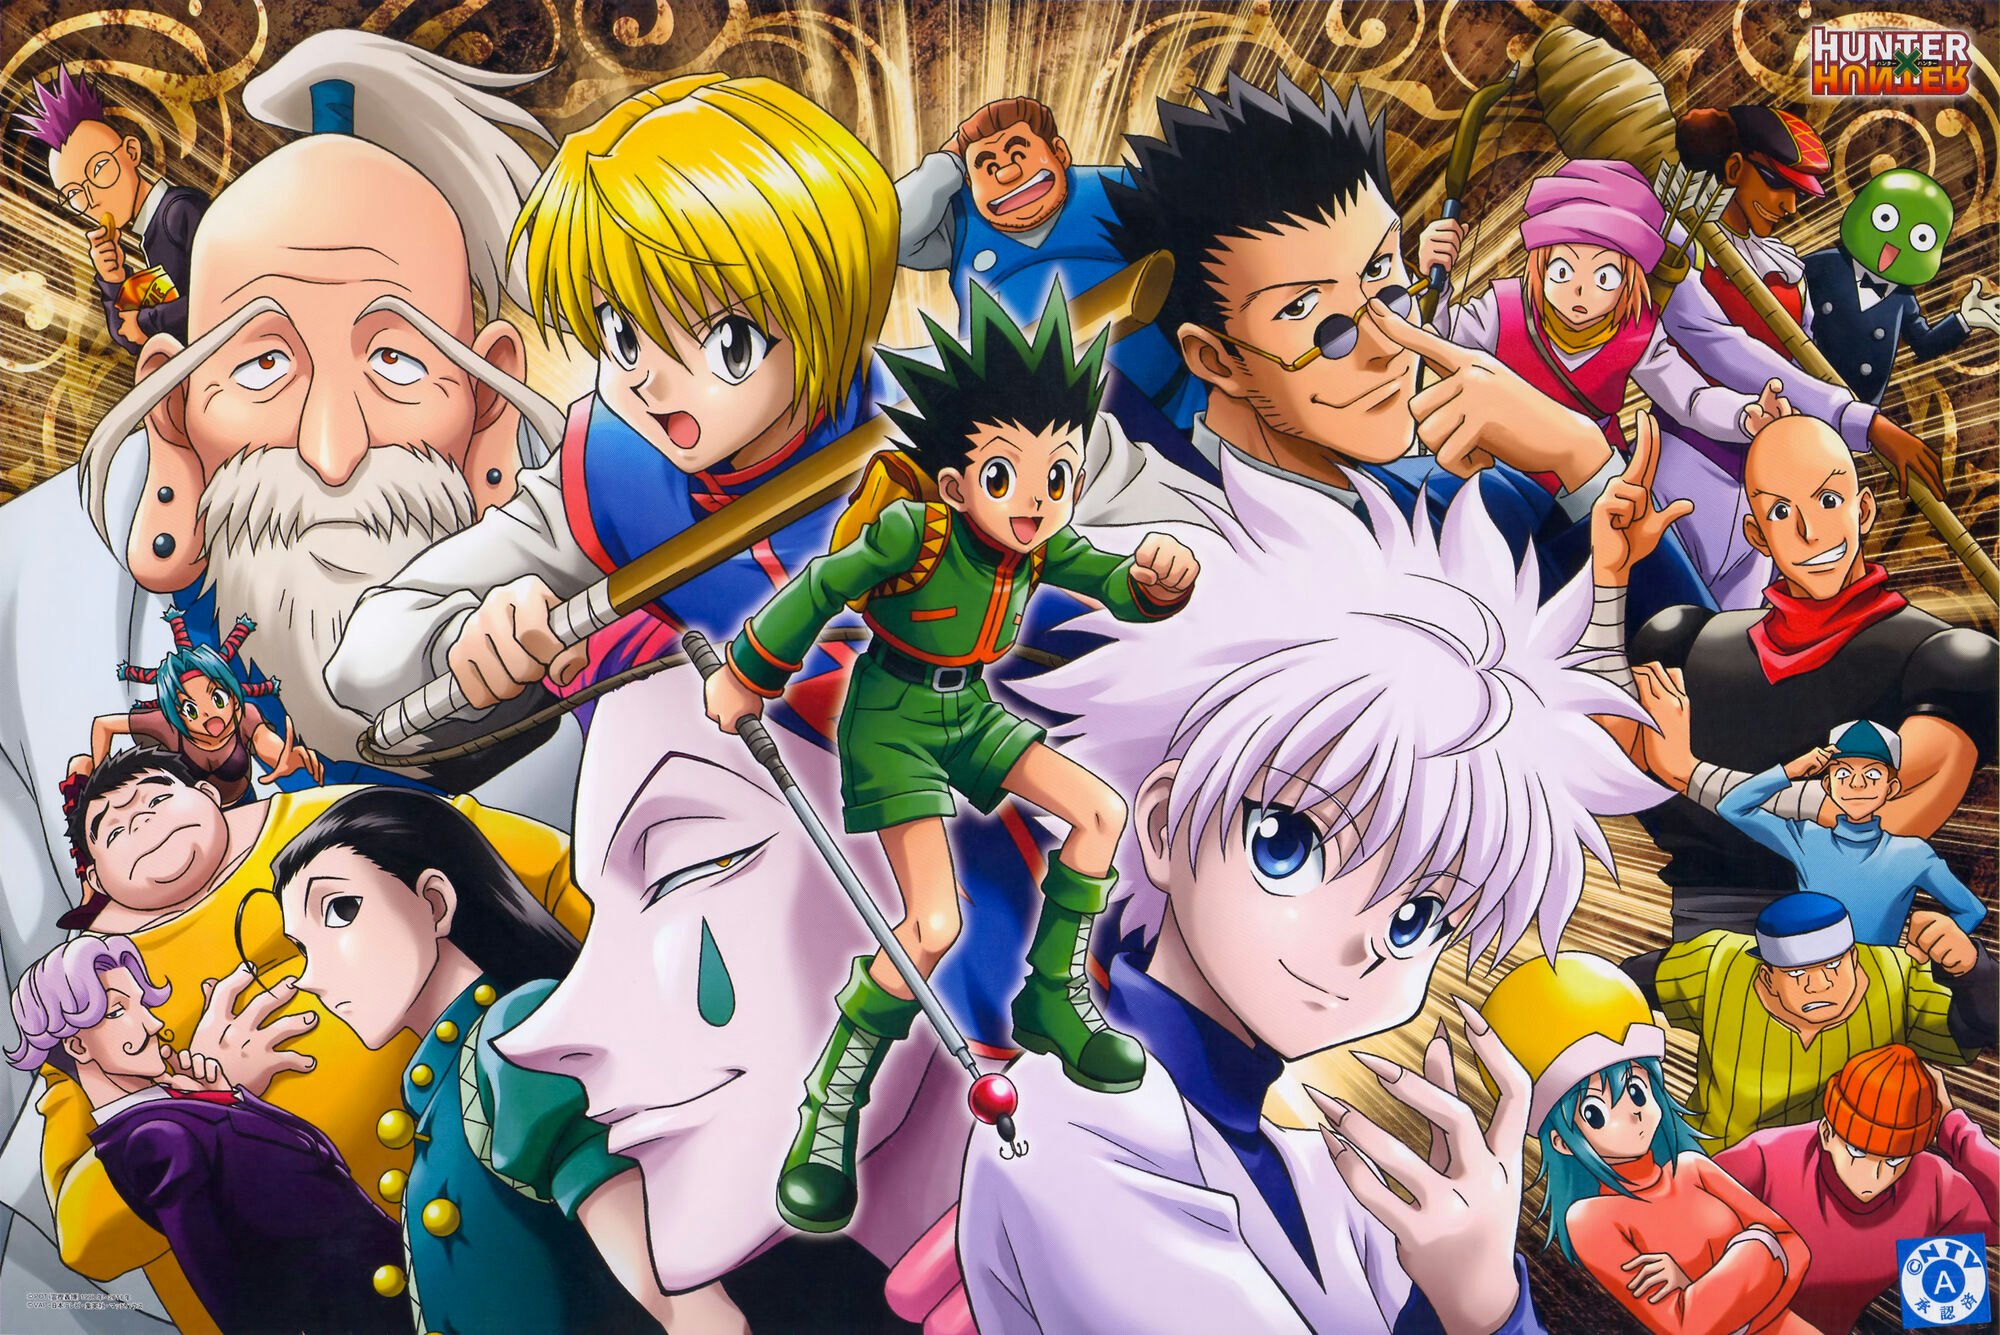 5 Reasons The Original Hunter X Hunter Is The Best Version  5 Reasons  Its The 2011 Series